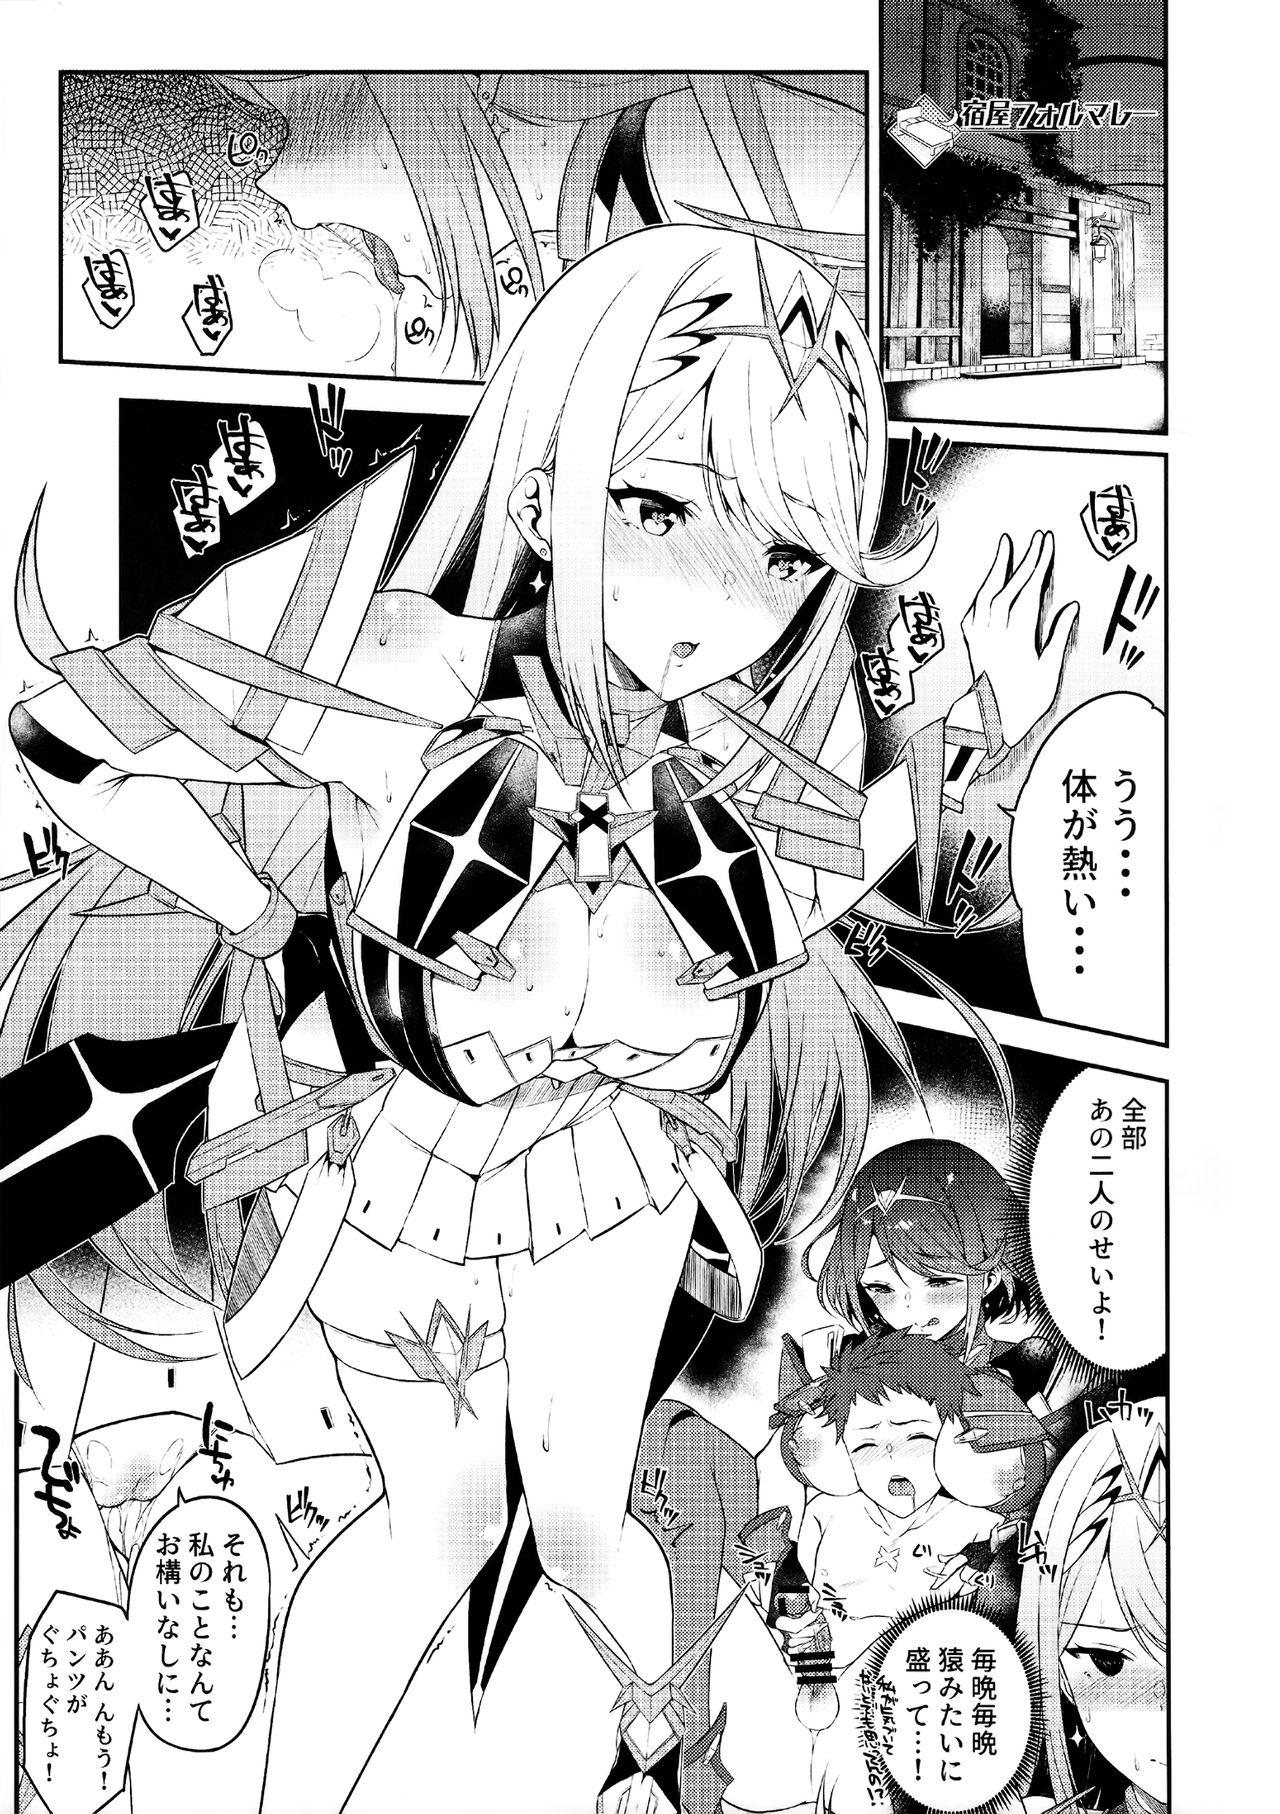 Chica Hikari Are - Xenoblade chronicles 2 Crazy - Page 3